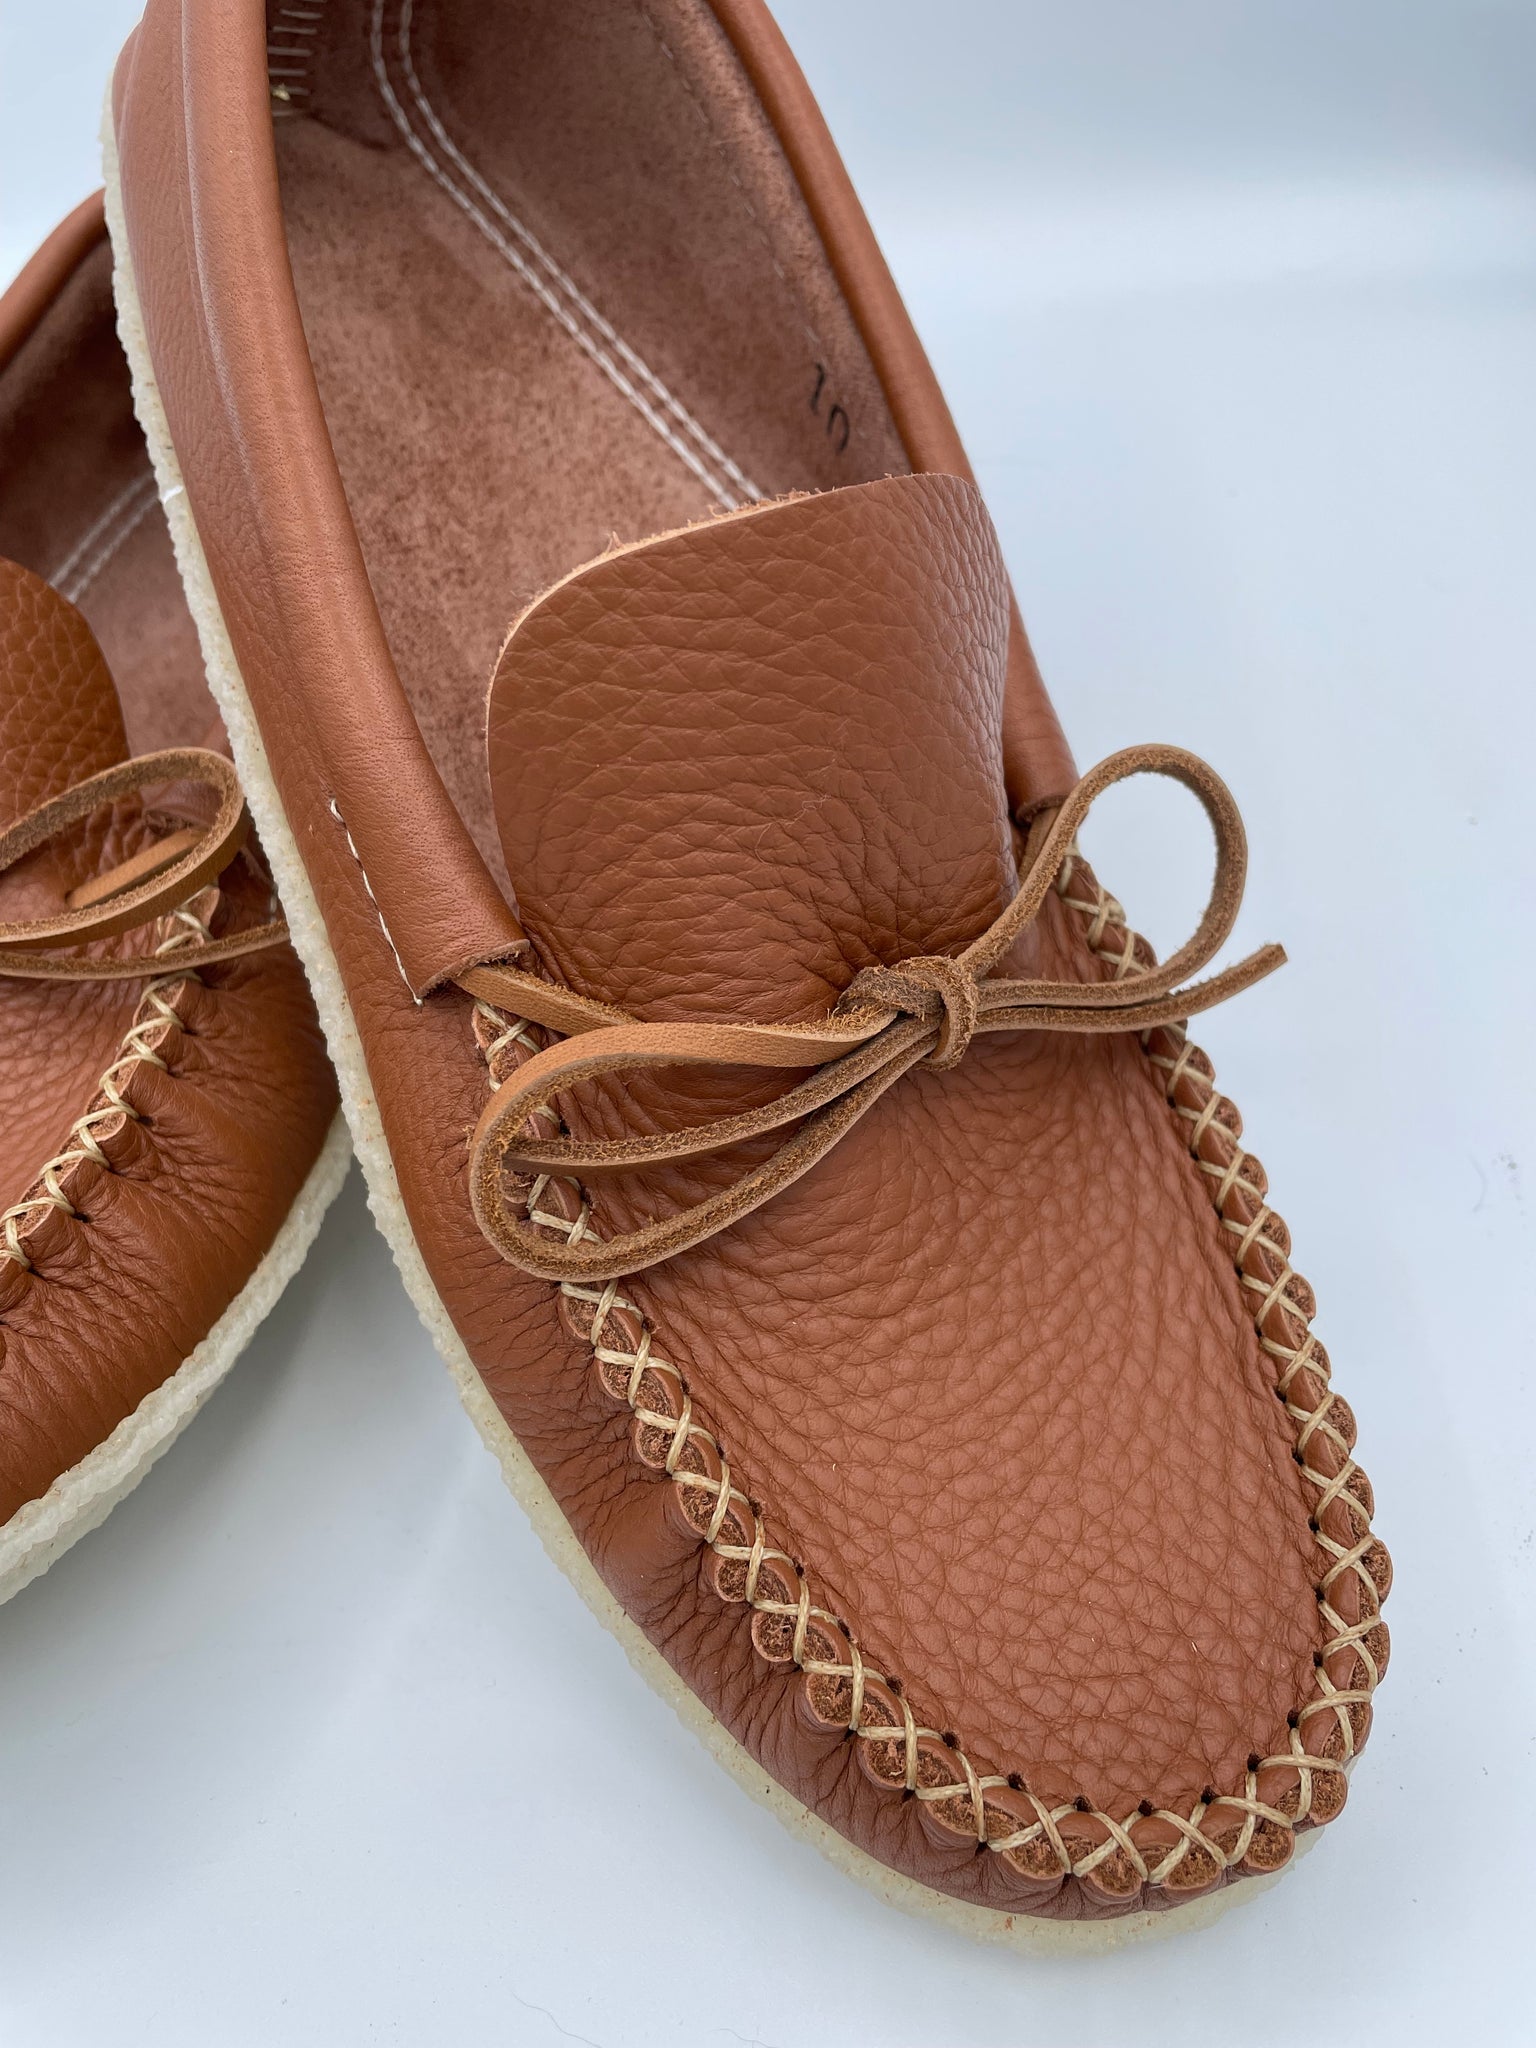 Men Moccasins with real leather